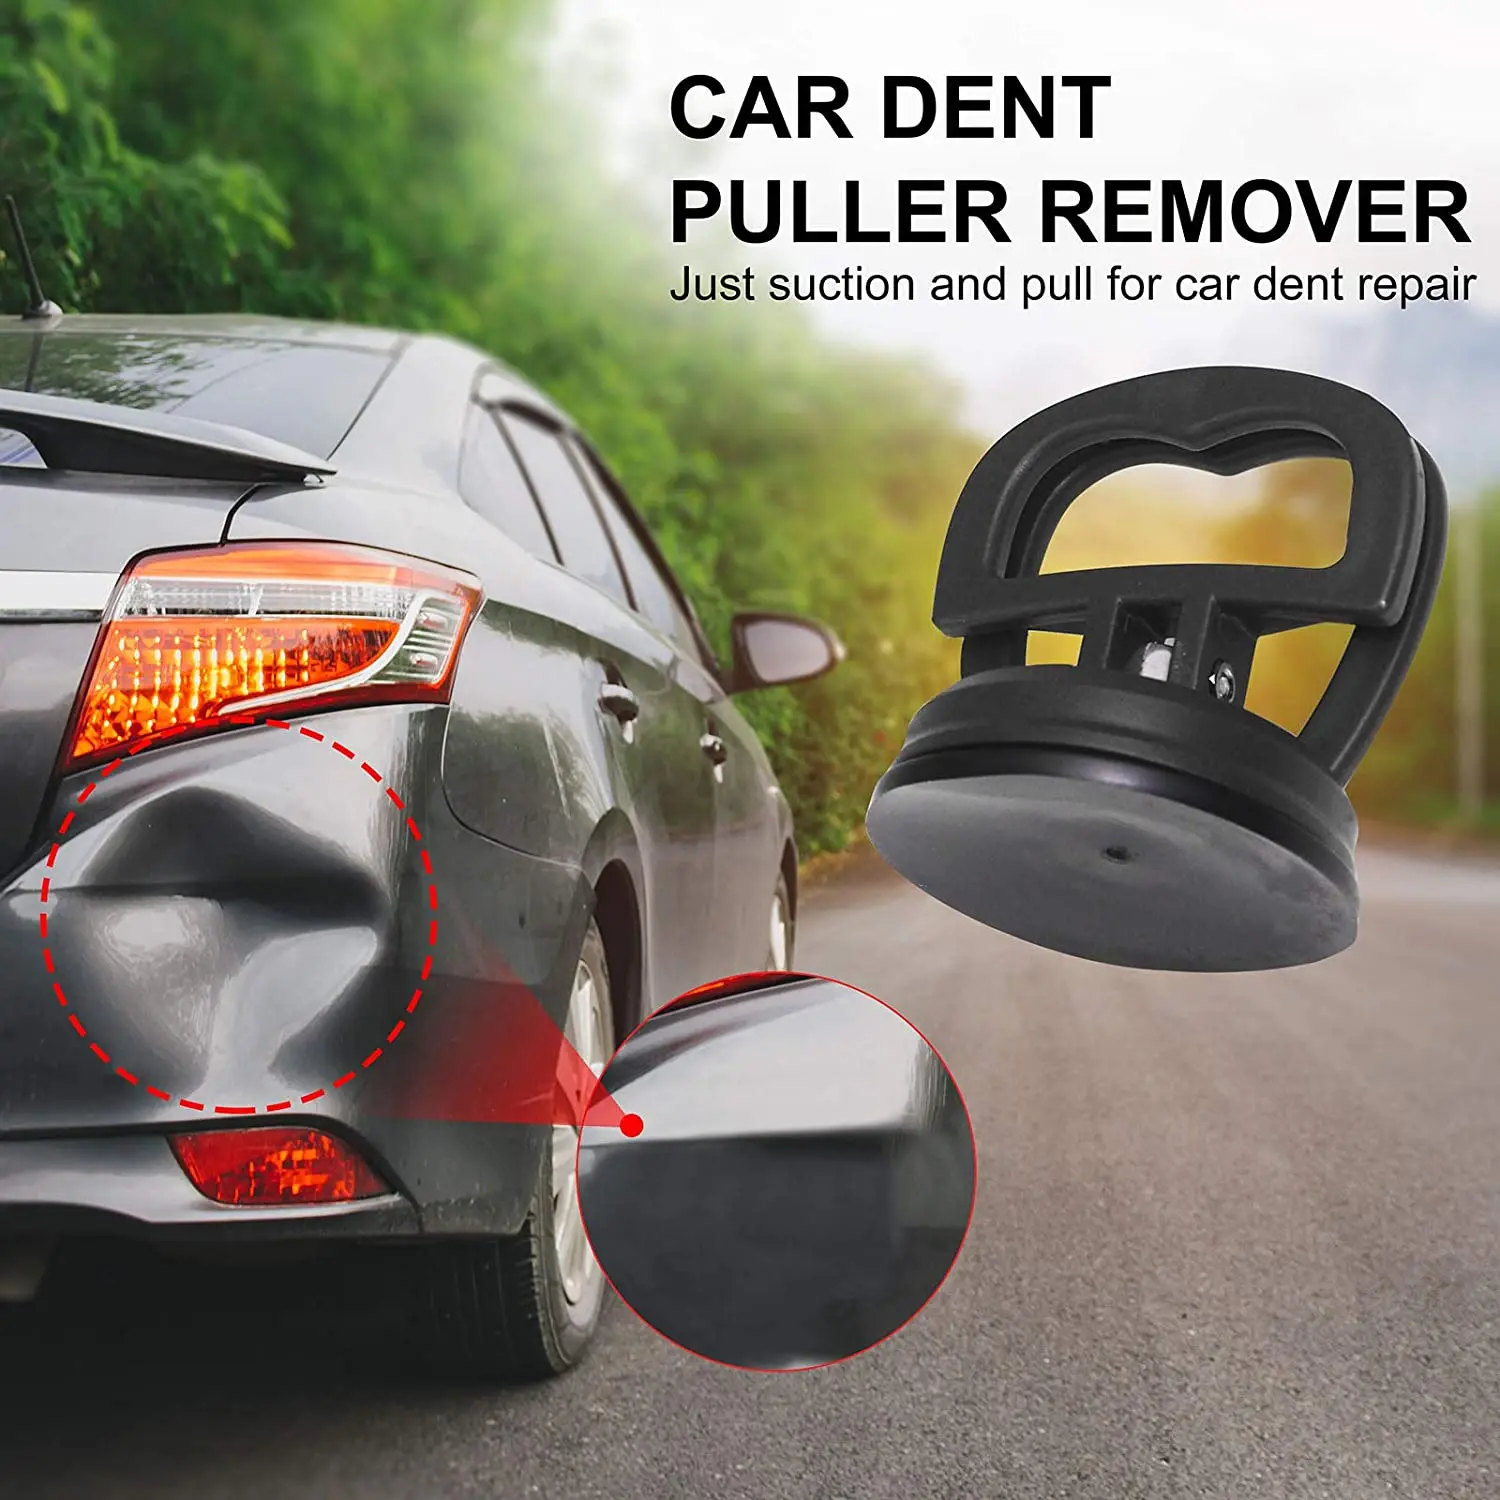 

Car Suction Cup Dent Puller Handle Lifter for BMW F10 E60 E46 E90 F30 E39 E36 E30 F20 E87 E34 E91 G30 X5 X3 X1 X7 1 3 5 7 Series